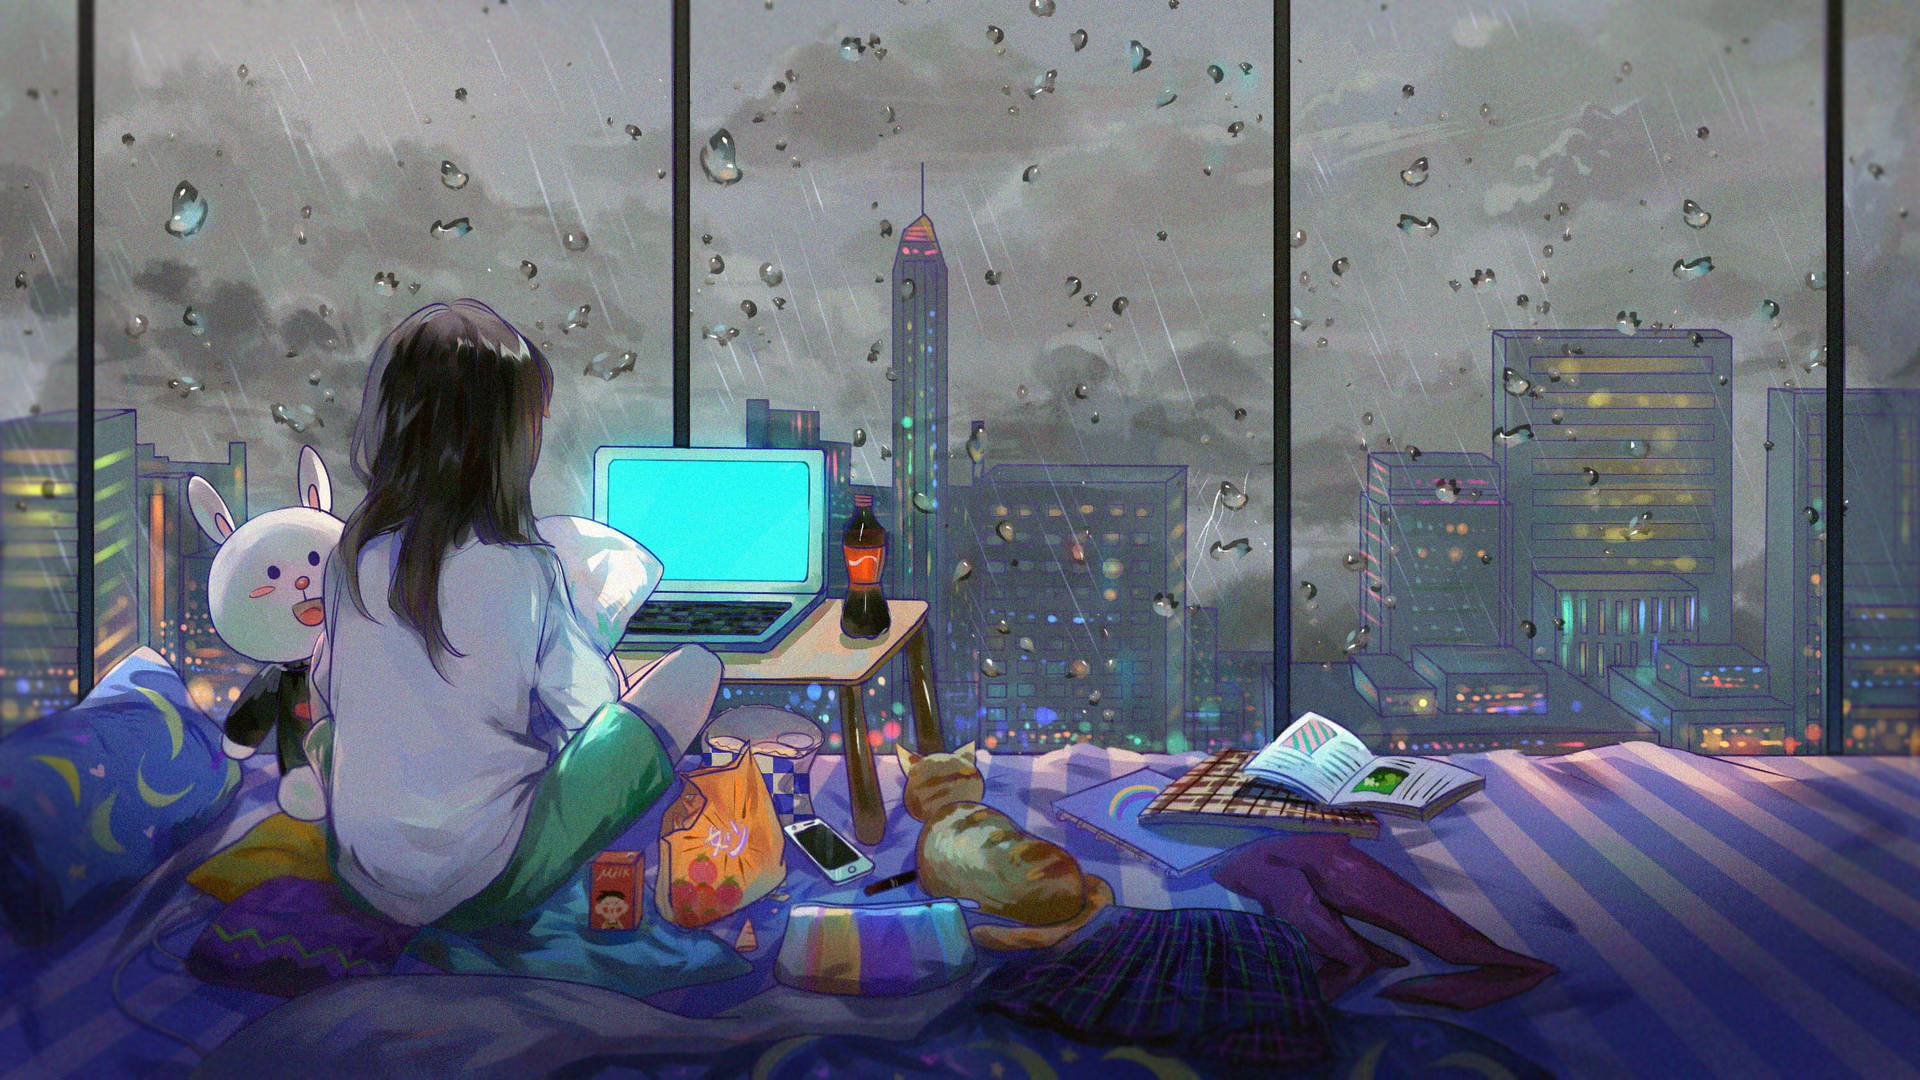 Download Animated Girl Rainy Day Wallpaper 